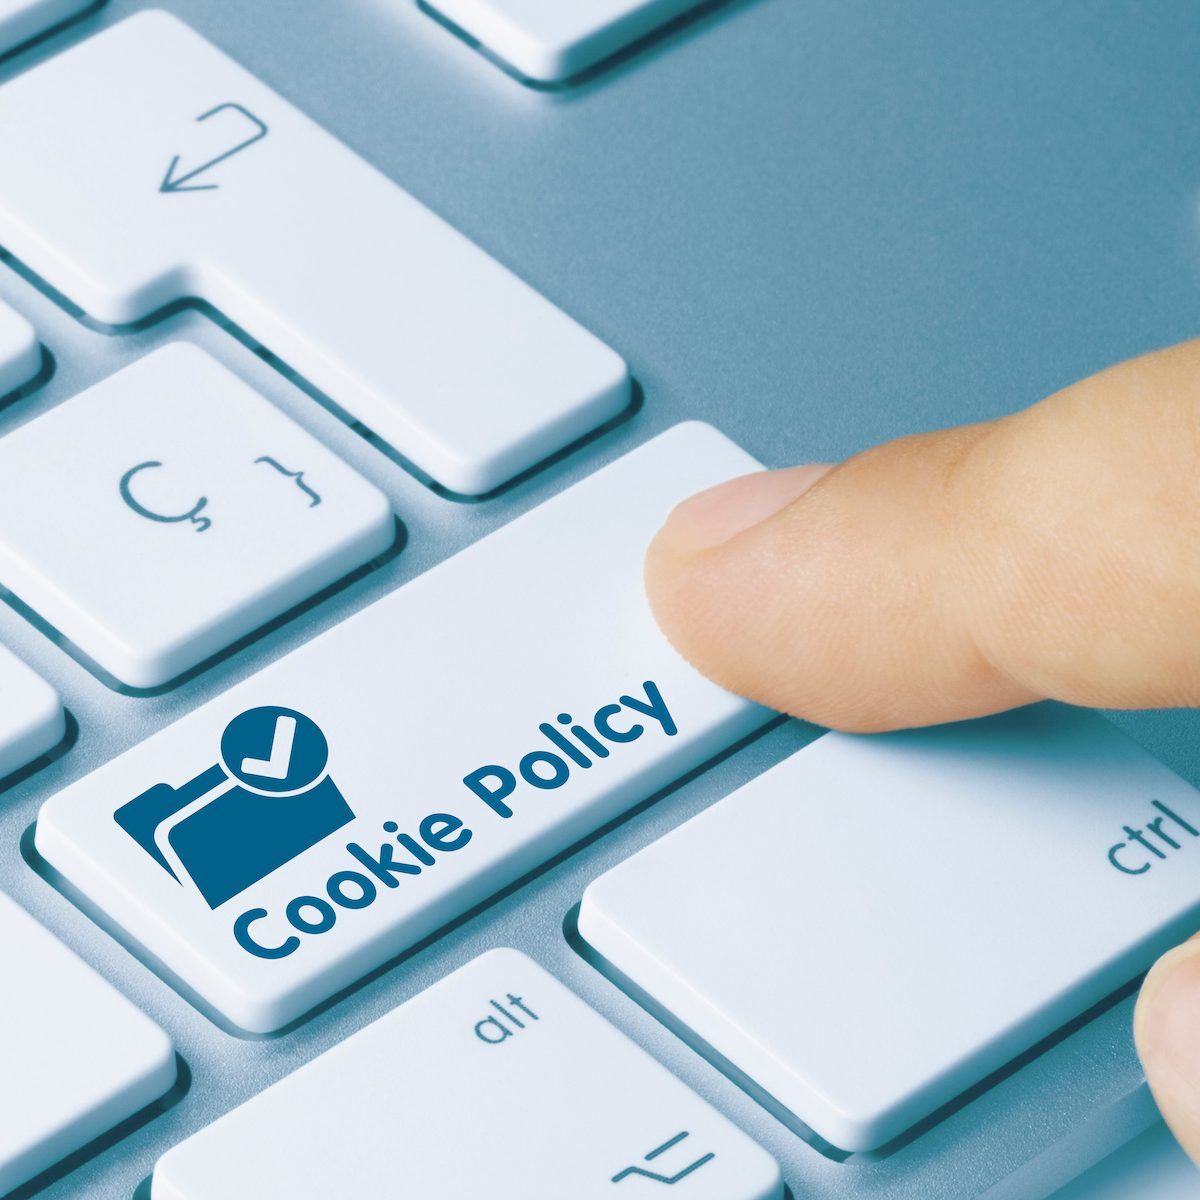 A finger shown pressing a button on a keyboard that says &quot;Cookie Policy.&quot;